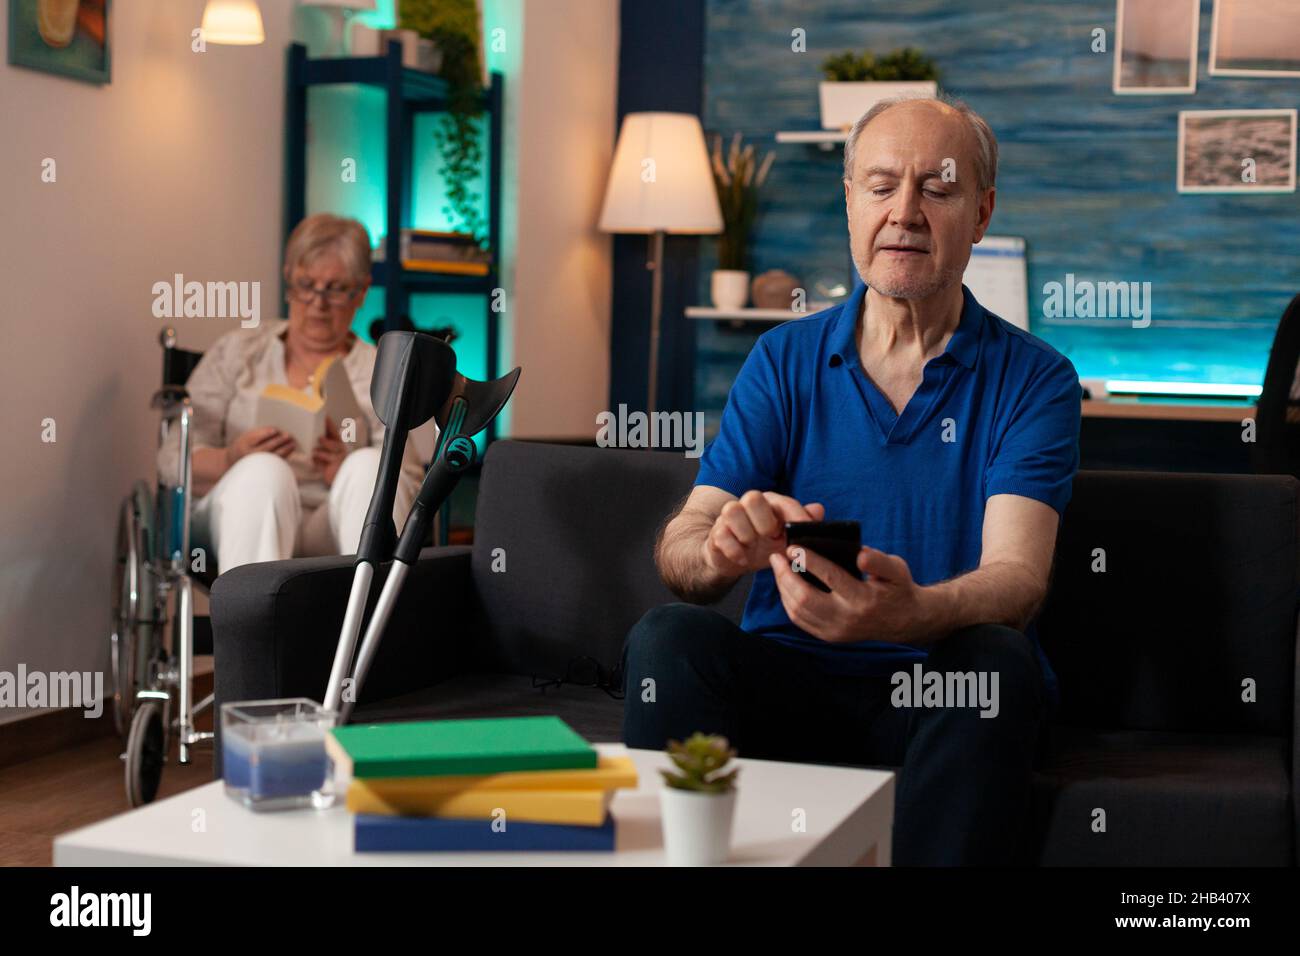 Aged caucasian man using smartphone on living room sofa. Senior adult holding modern device with technology looking at screen while old woman in wheelchair sitting in background Stock Photo